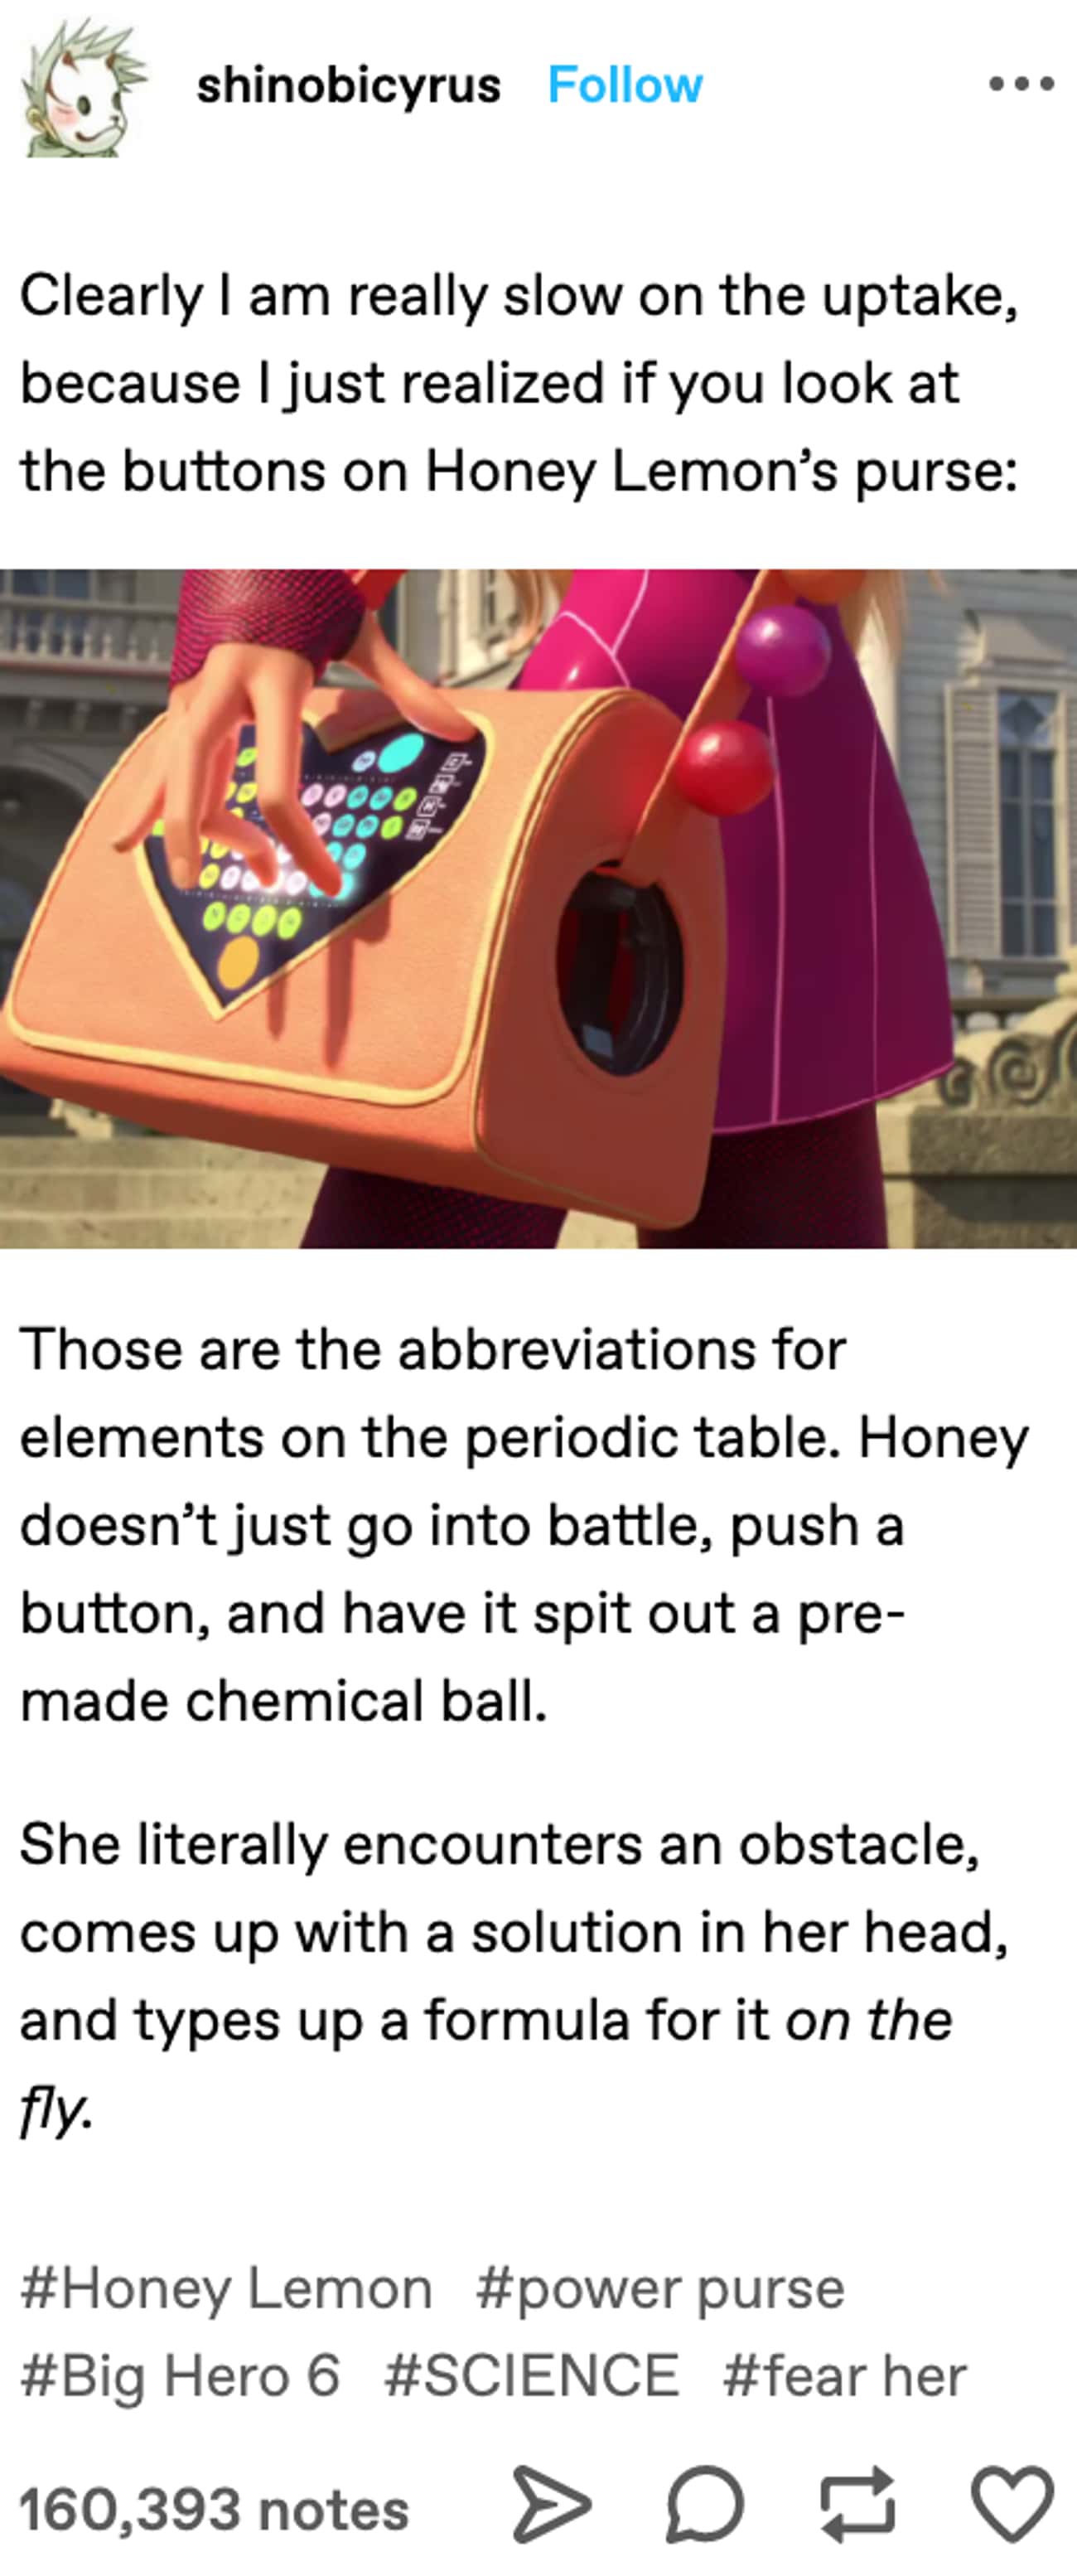 Honey Lemon Uses Her Chemistry Knowledge At A Moment's Notice To Fight Creatively